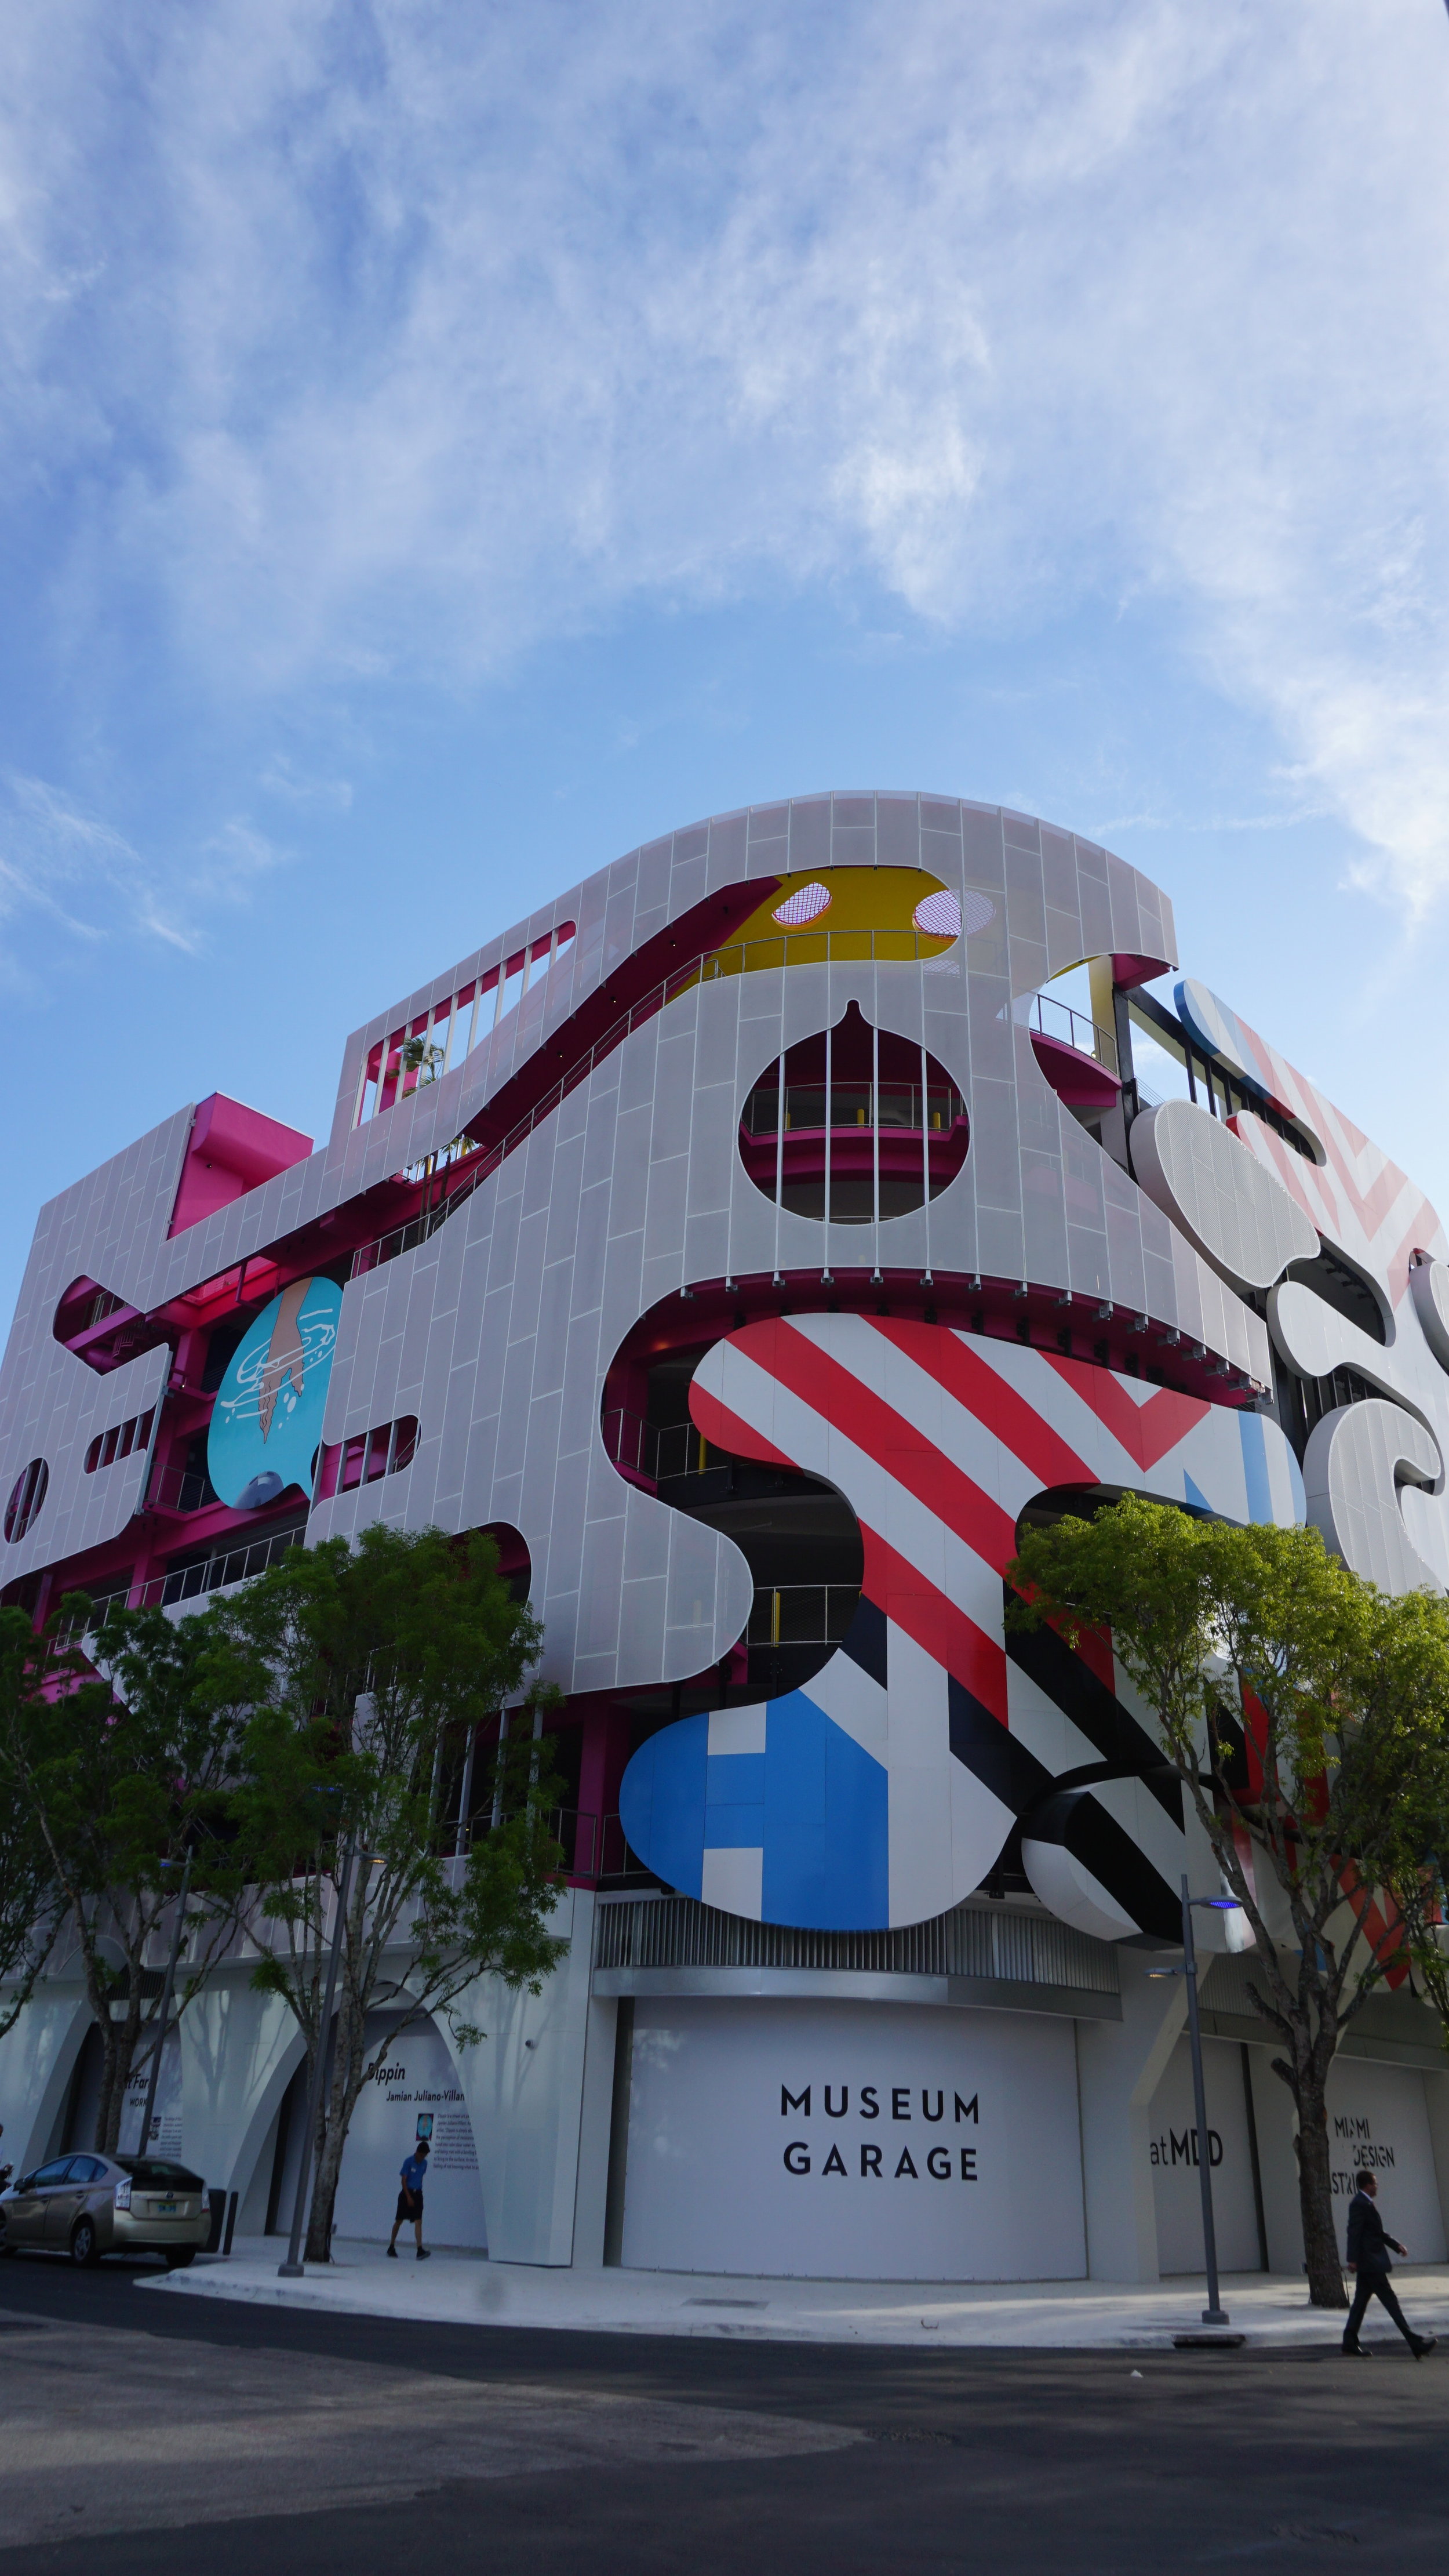 Miami Design District - When you arrive #atMDD, one of the first